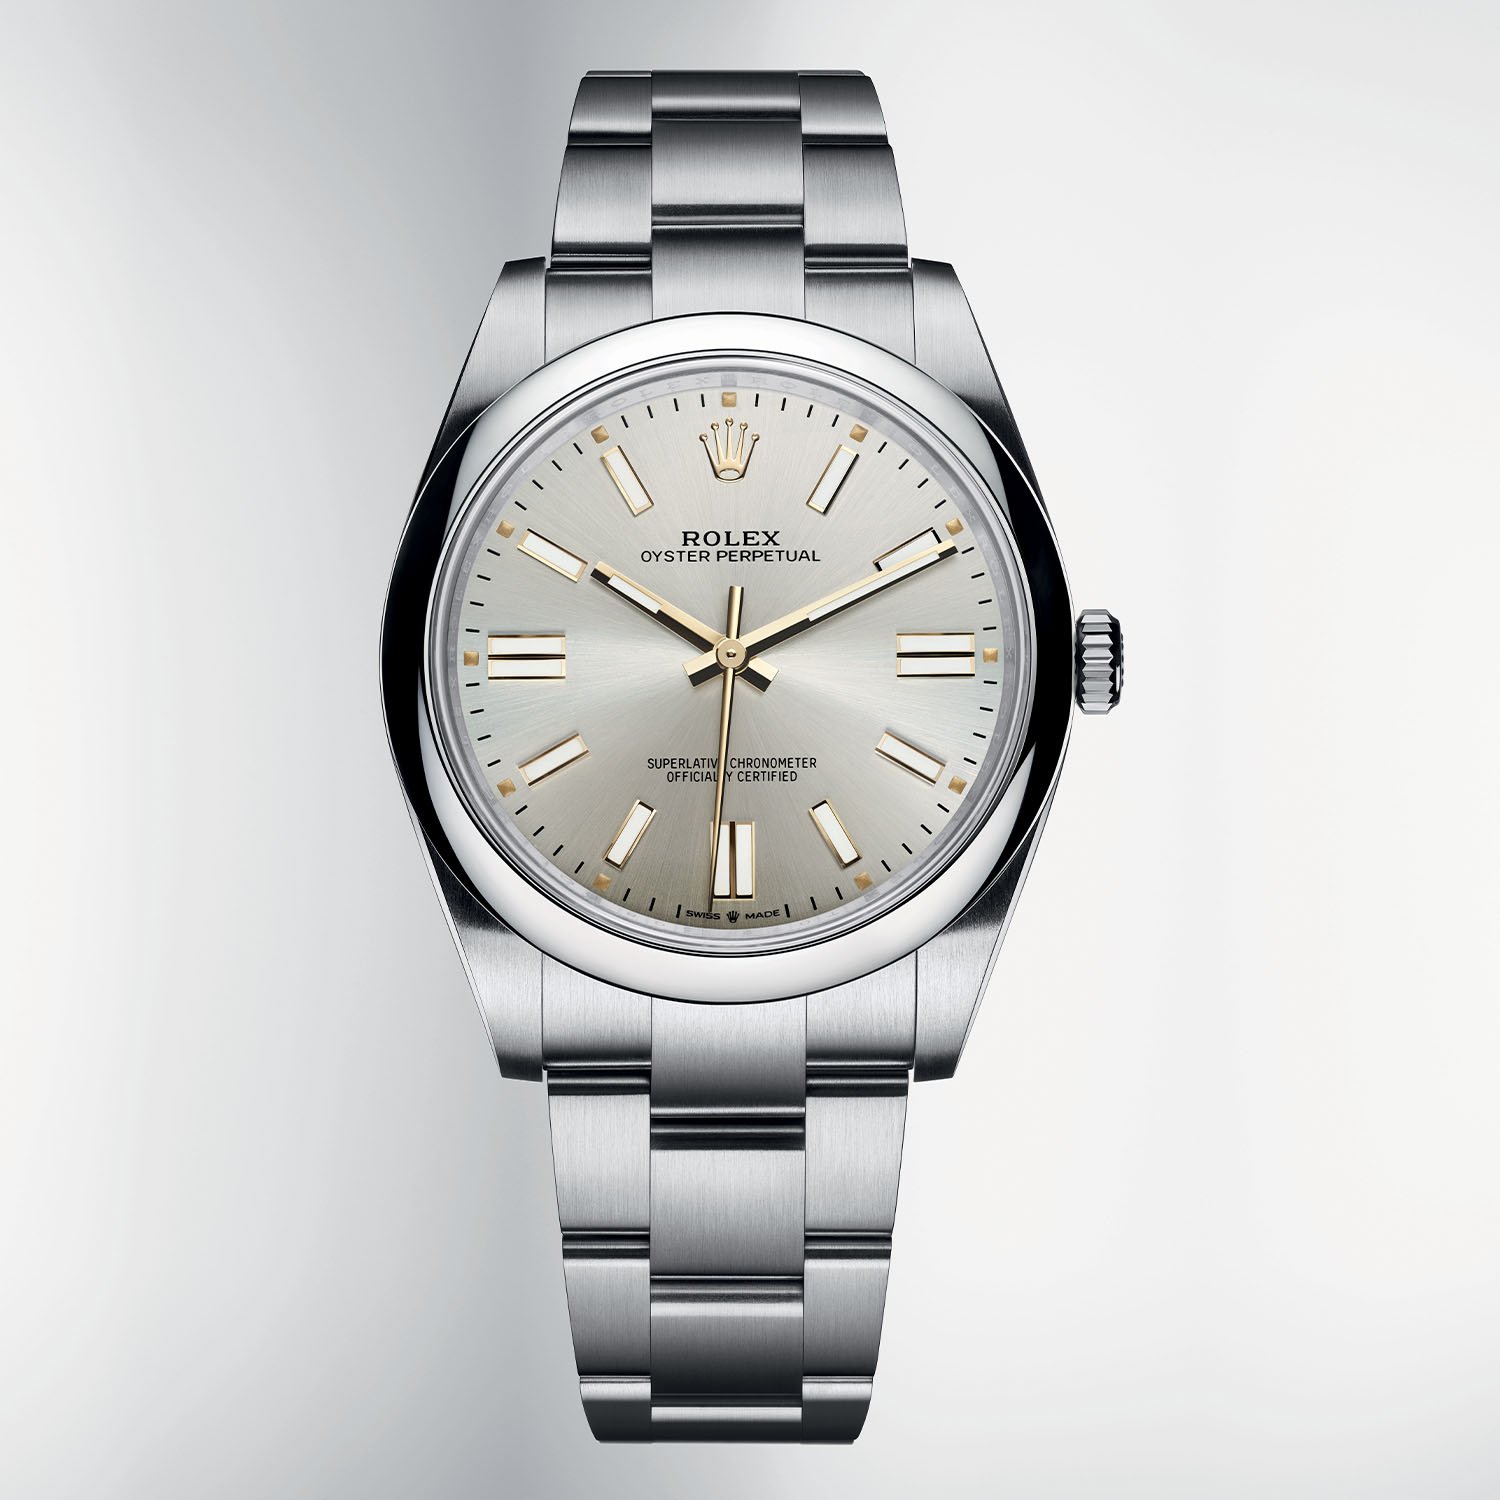 Introducing - 2020 Oyster Perpetual 41 Reference